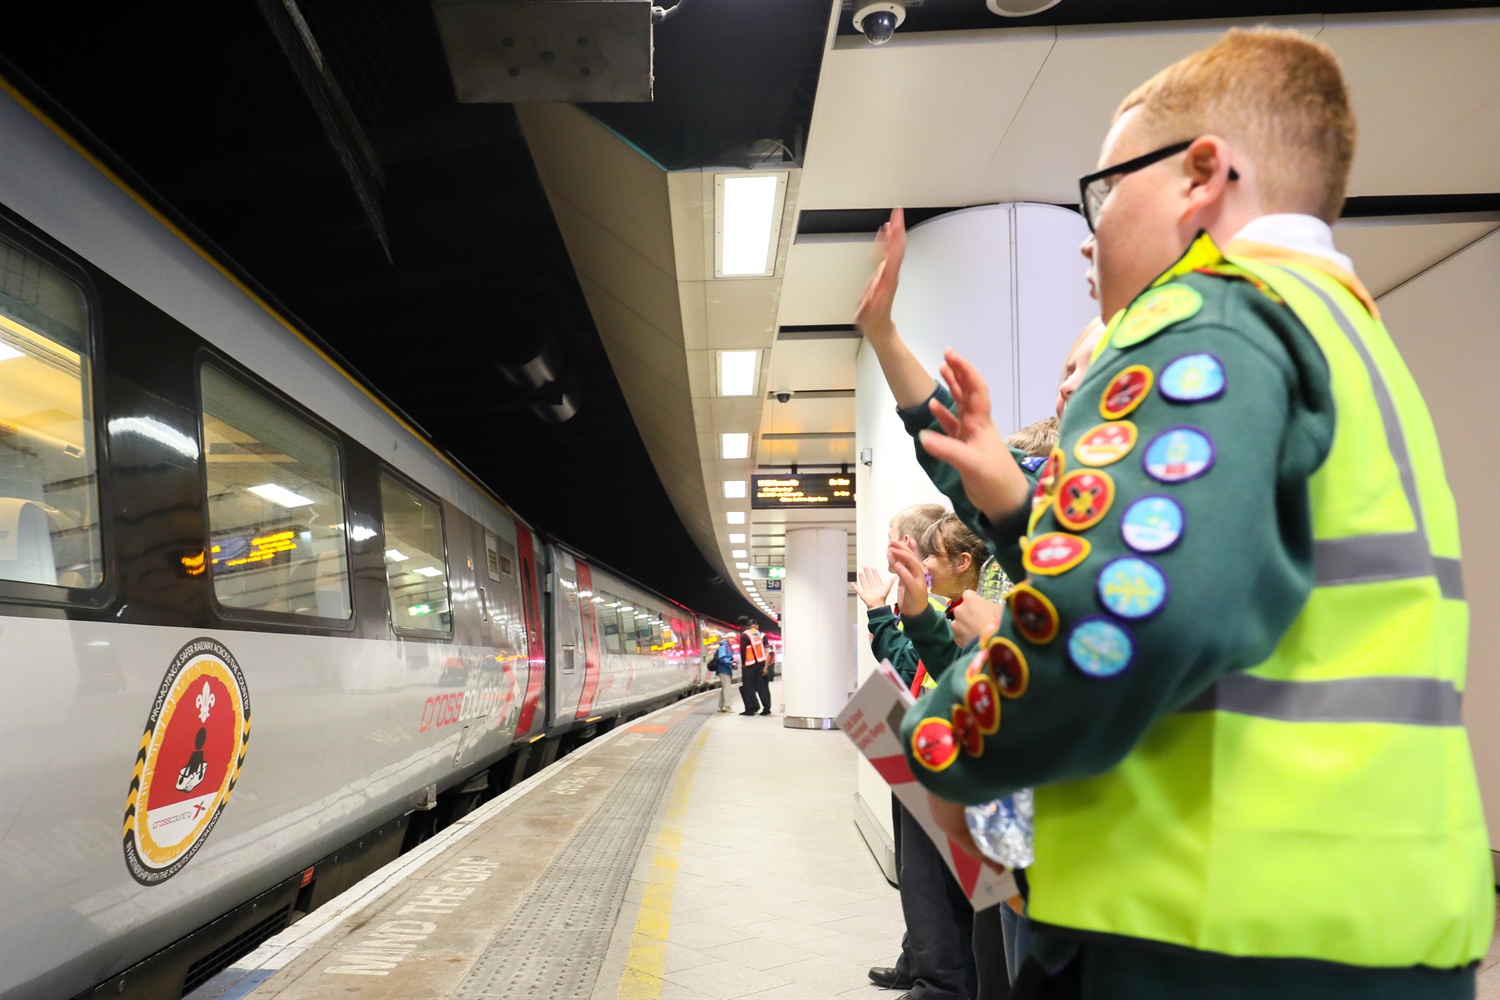 CrossCountry partners with Scouts to push rail safety education initiative